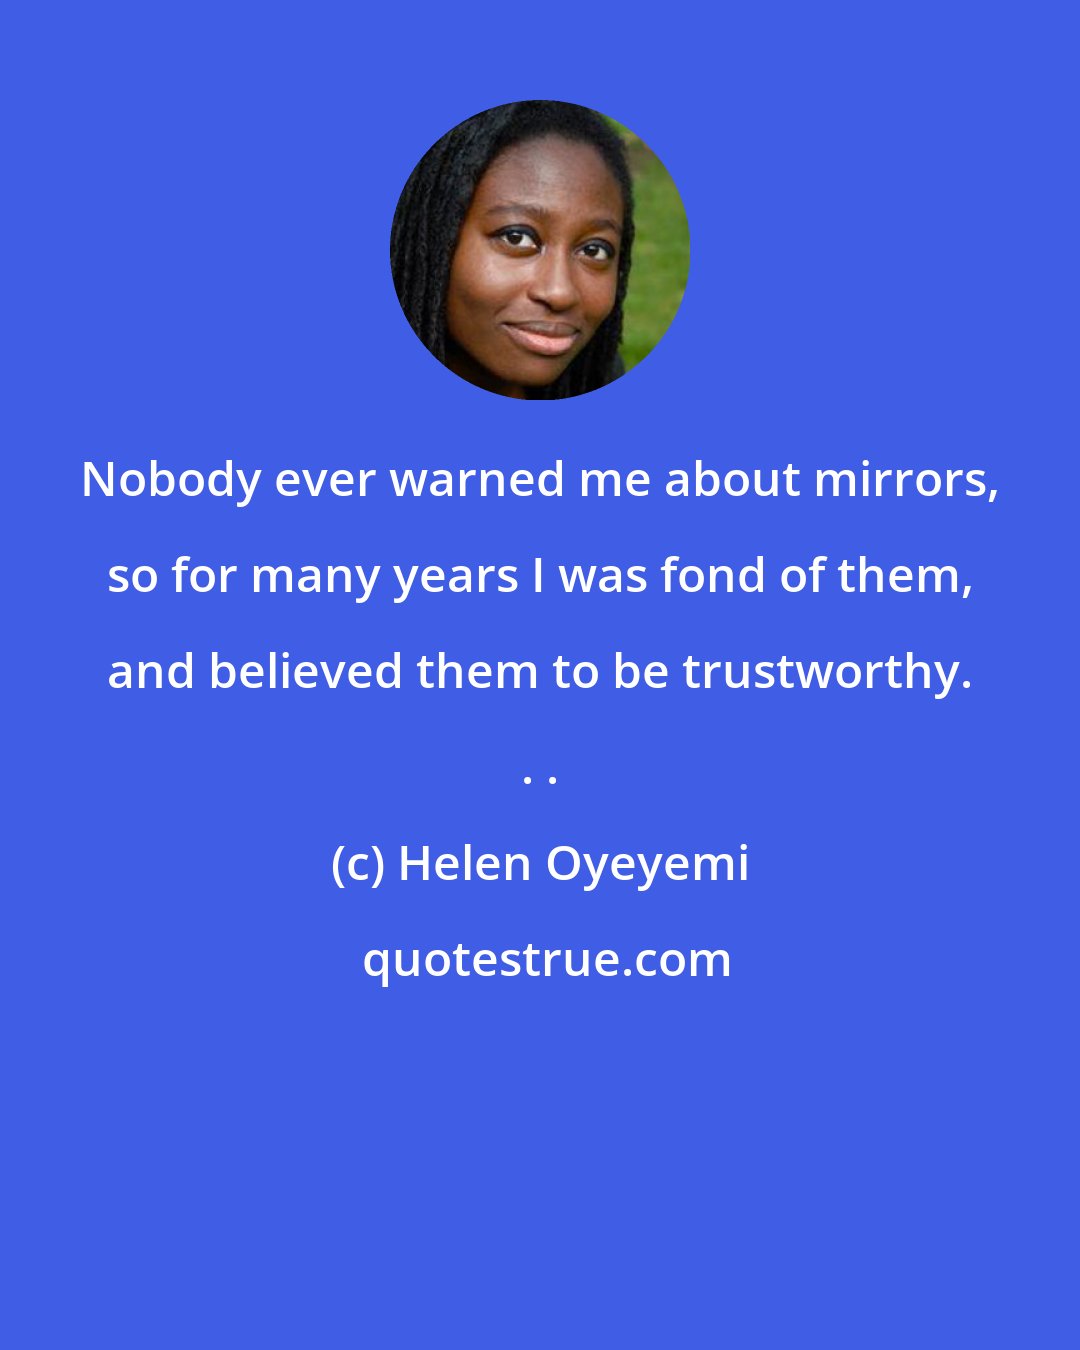 Helen Oyeyemi: Nobody ever warned me about mirrors, so for many years I was fond of them, and believed them to be trustworthy. . .